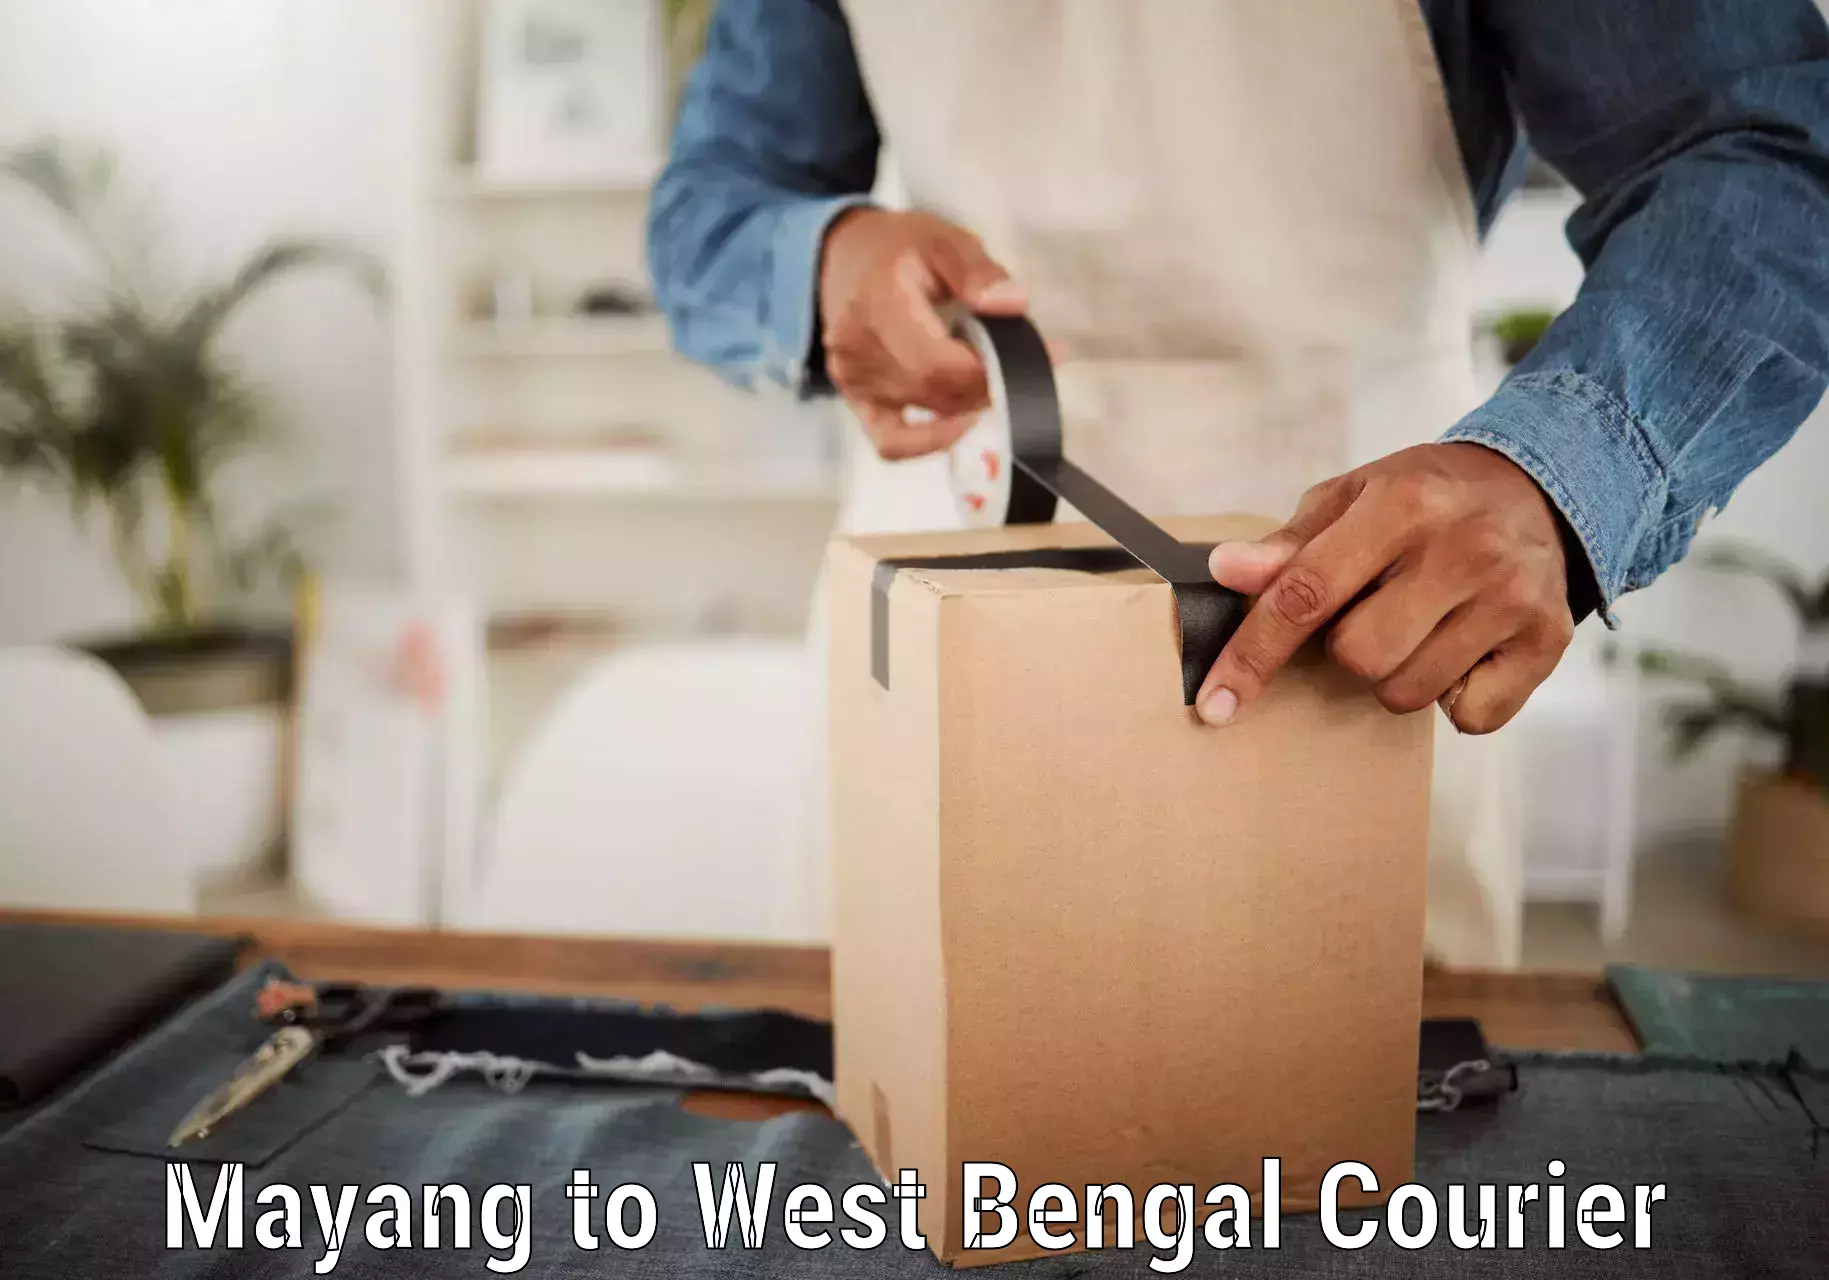 Reliable courier service Mayang to West Bengal